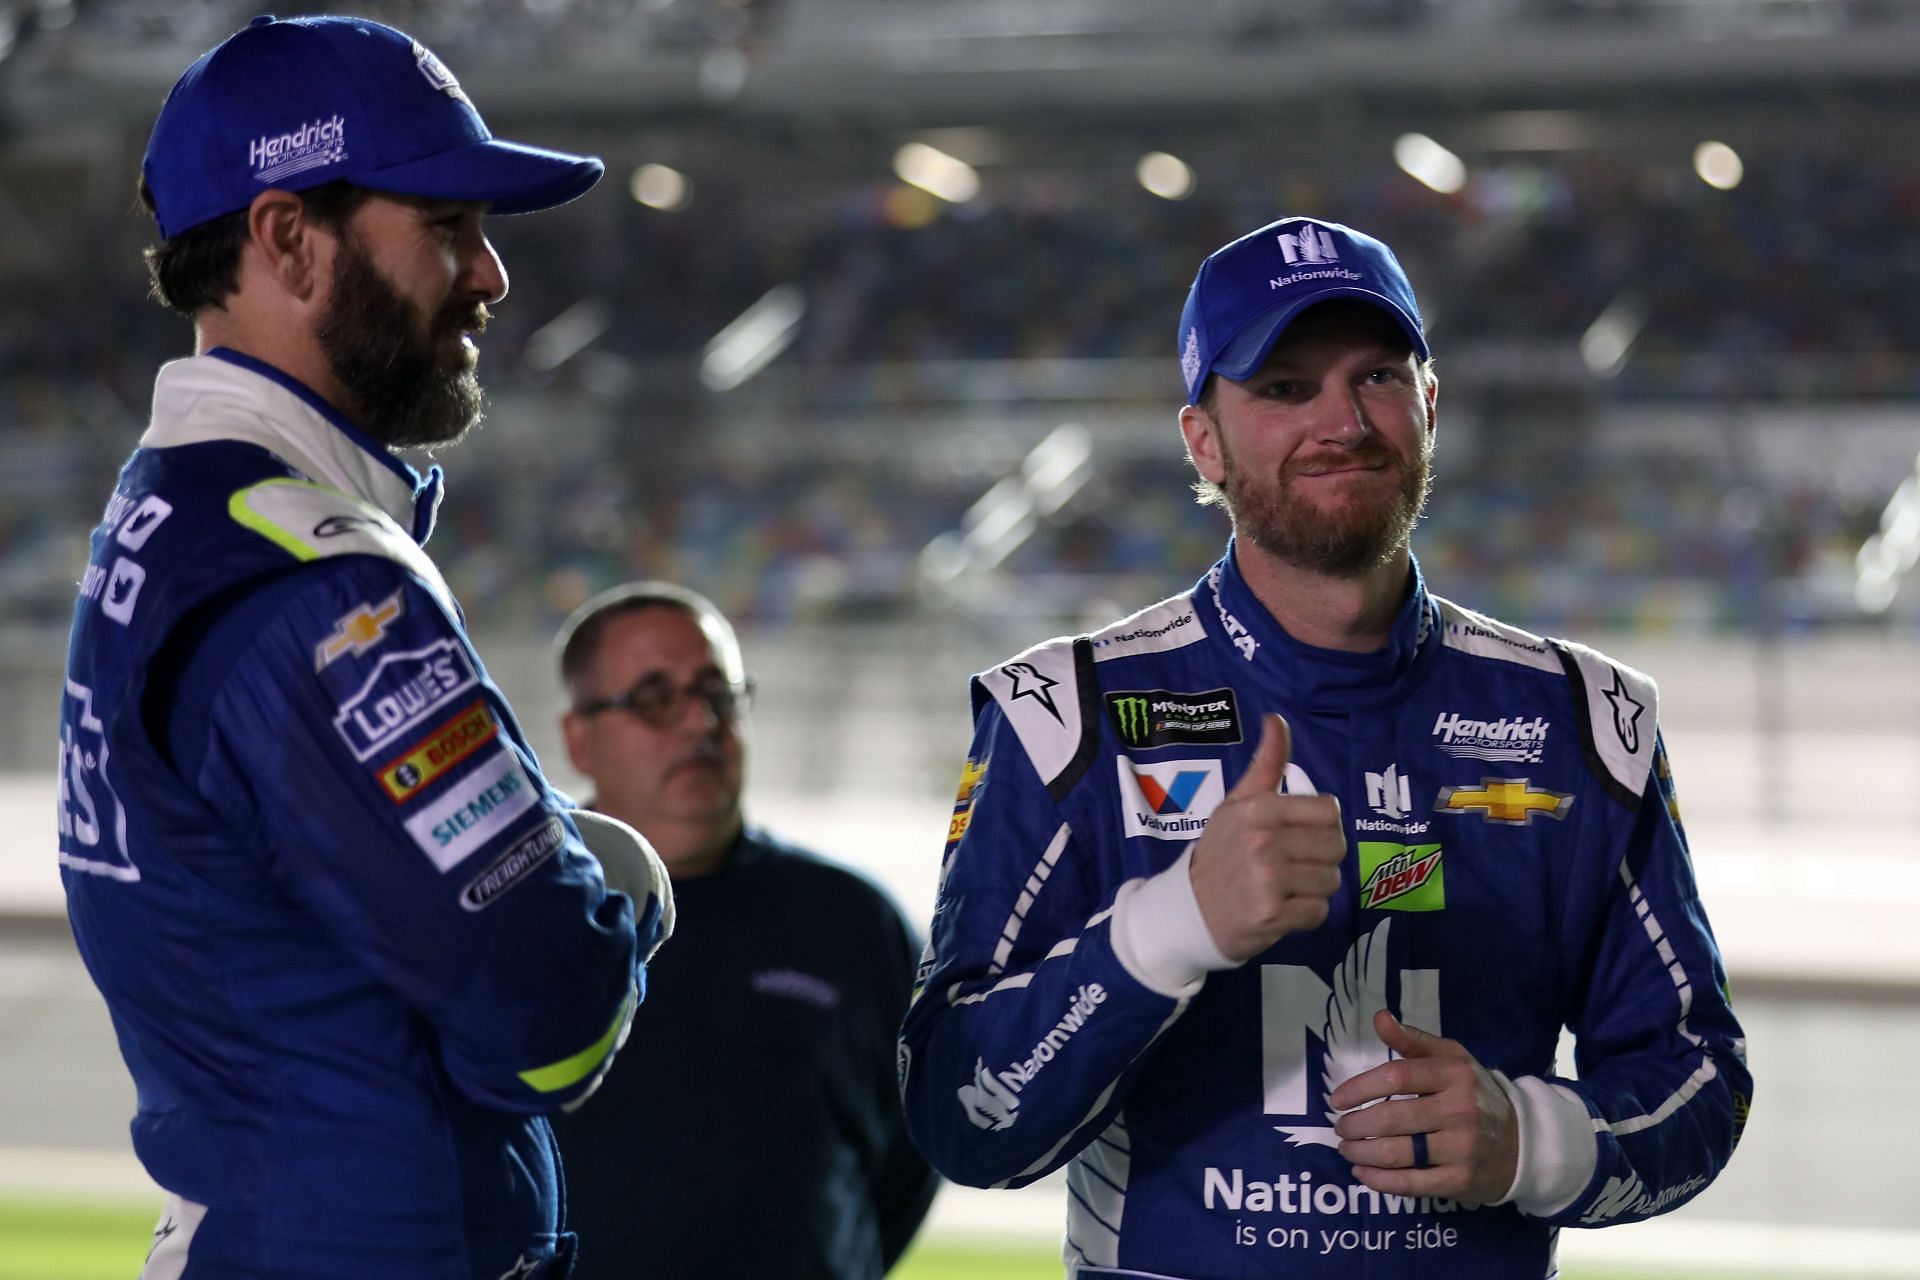 Jimmie Johnson (L) and Dale Earnhardt Jr (R) talk prior to the Monster Energy NASCAR Cup Series Can-Am Duel 2 at Daytona International Speedway